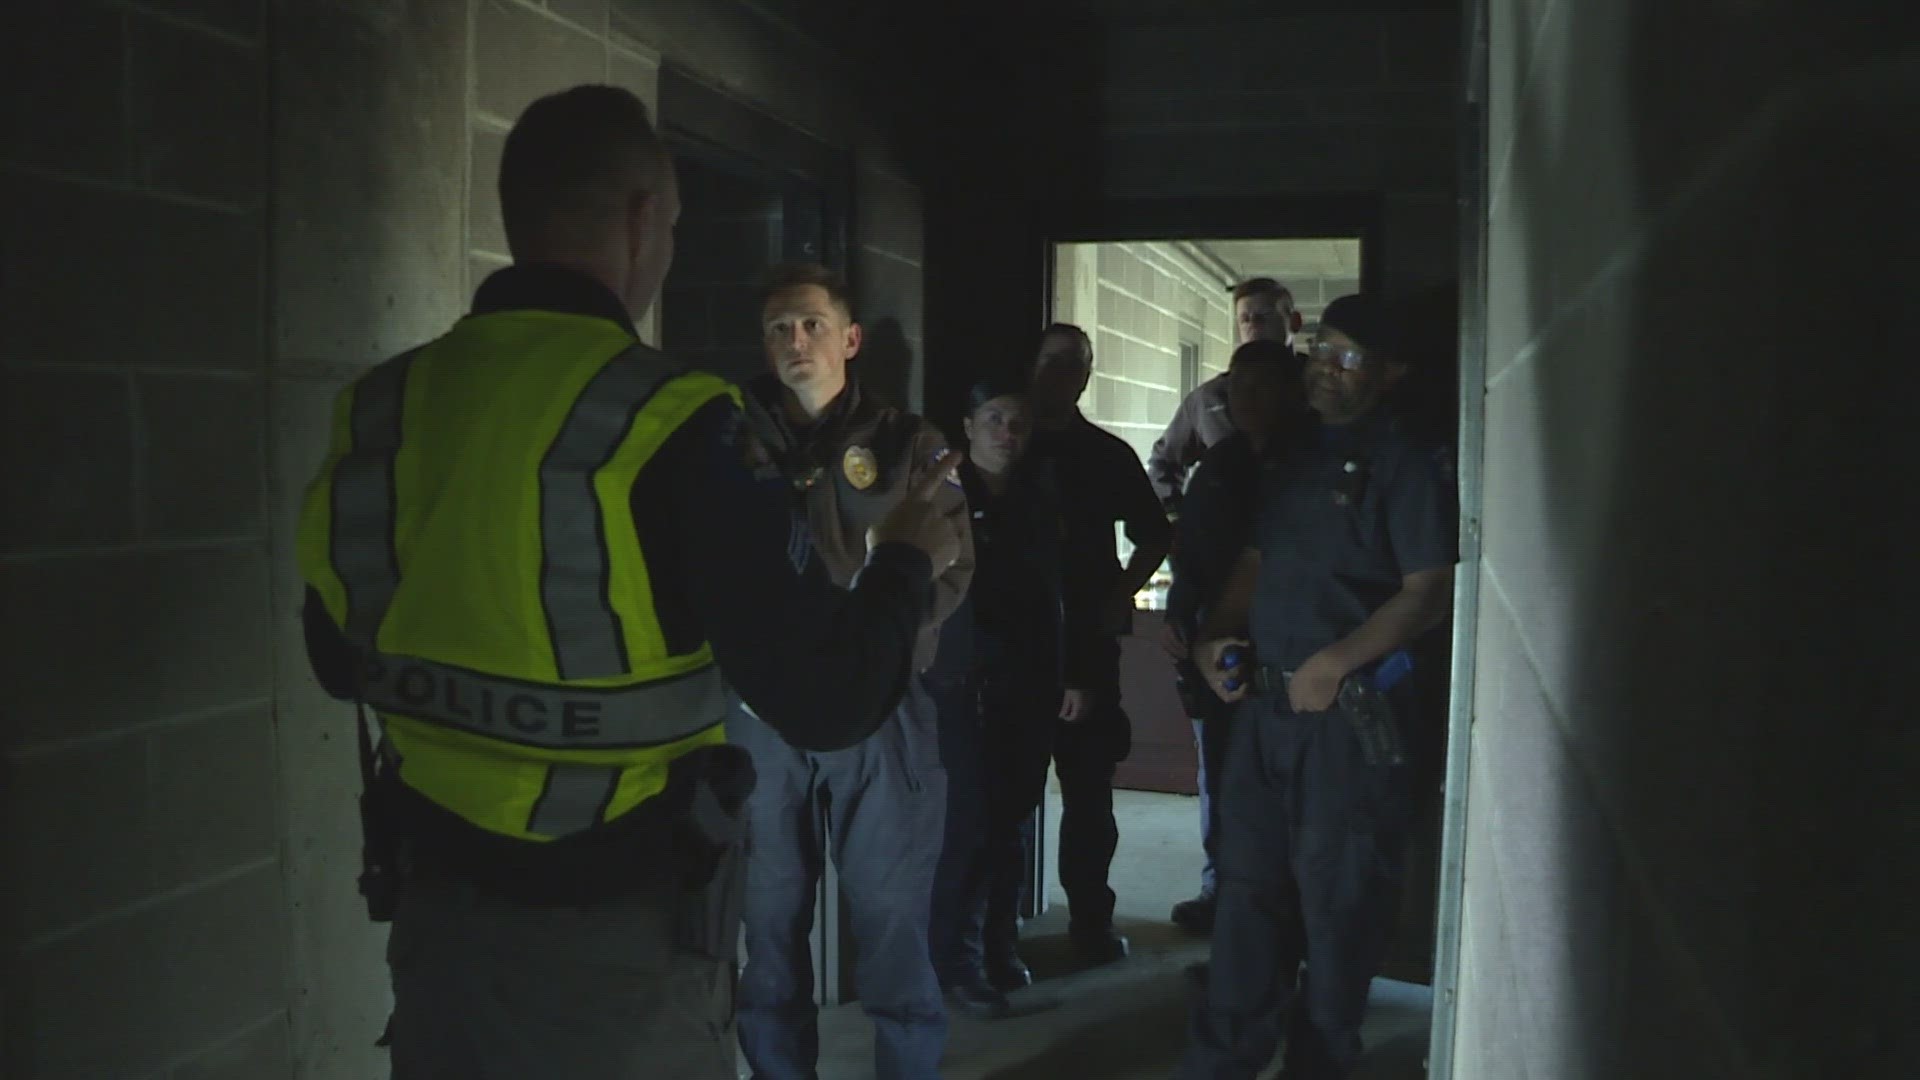 Aurora police recruits took a class on how to respond to an active shooter – from veteran officers who responded to the Aurora theater shooting.